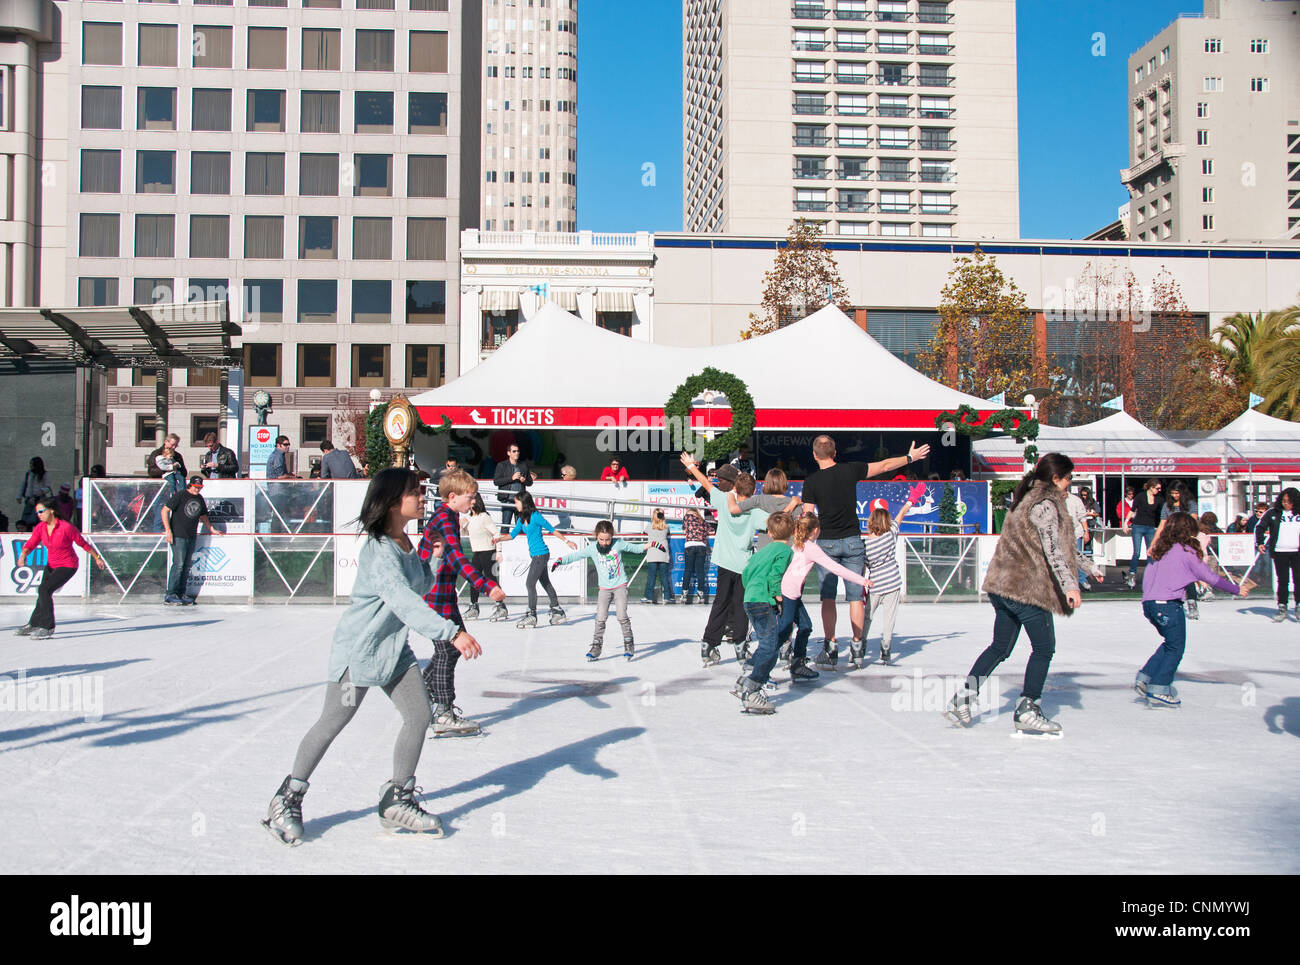 The Holiday Ice Rink at Union Square, San Francisco, California Stock Photo